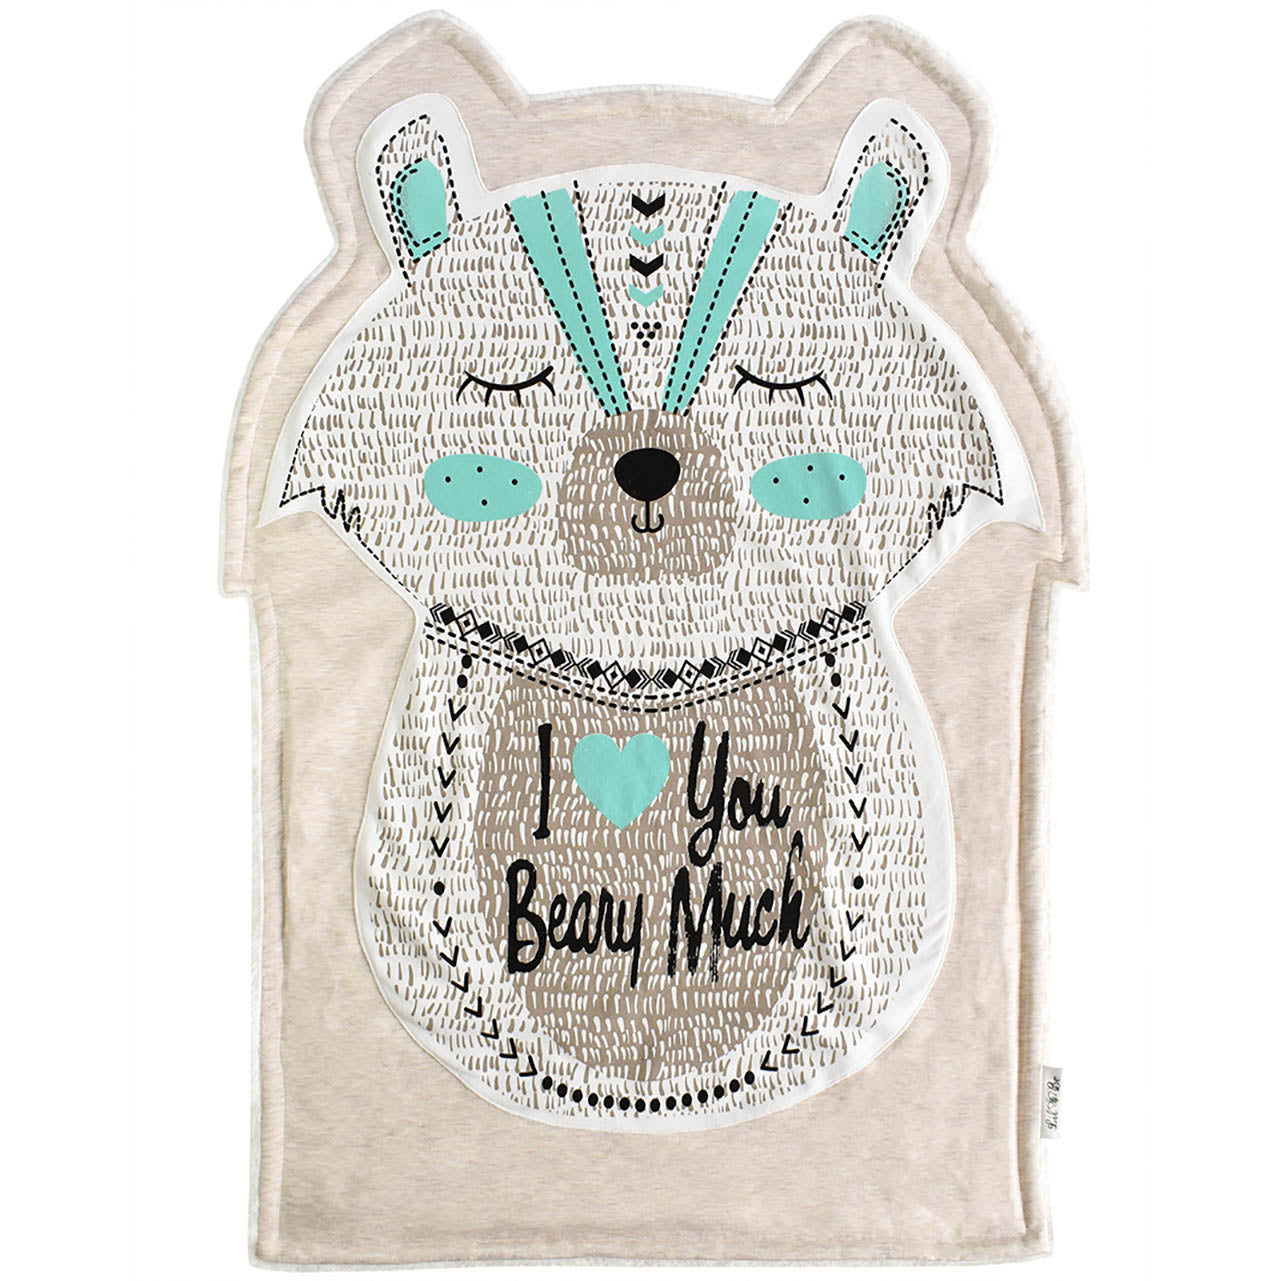 I love you beary much character shaped baby blanket